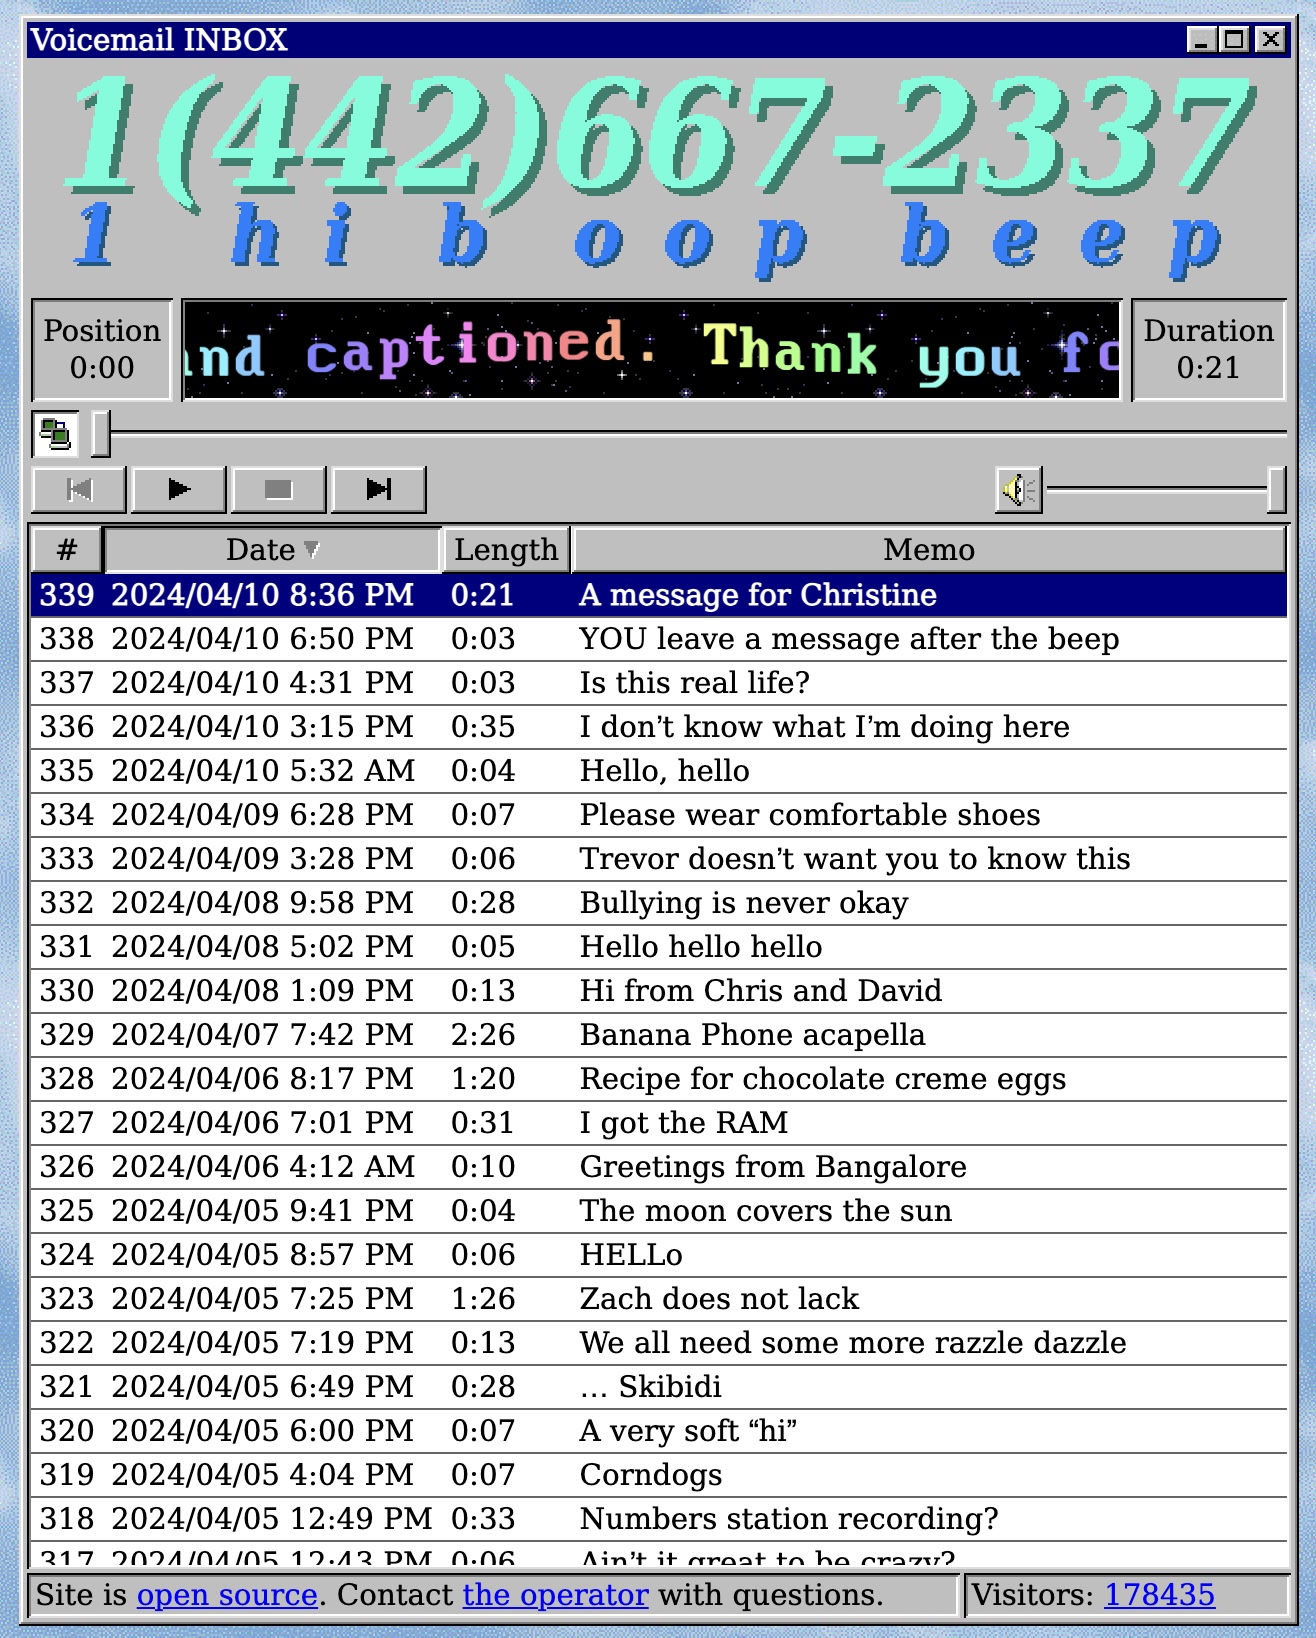 A windows OS type interface for voicemail inbox, with the phone number at the top 1 (422) 667-2337. Below are a list of messages you can click to listen to them.